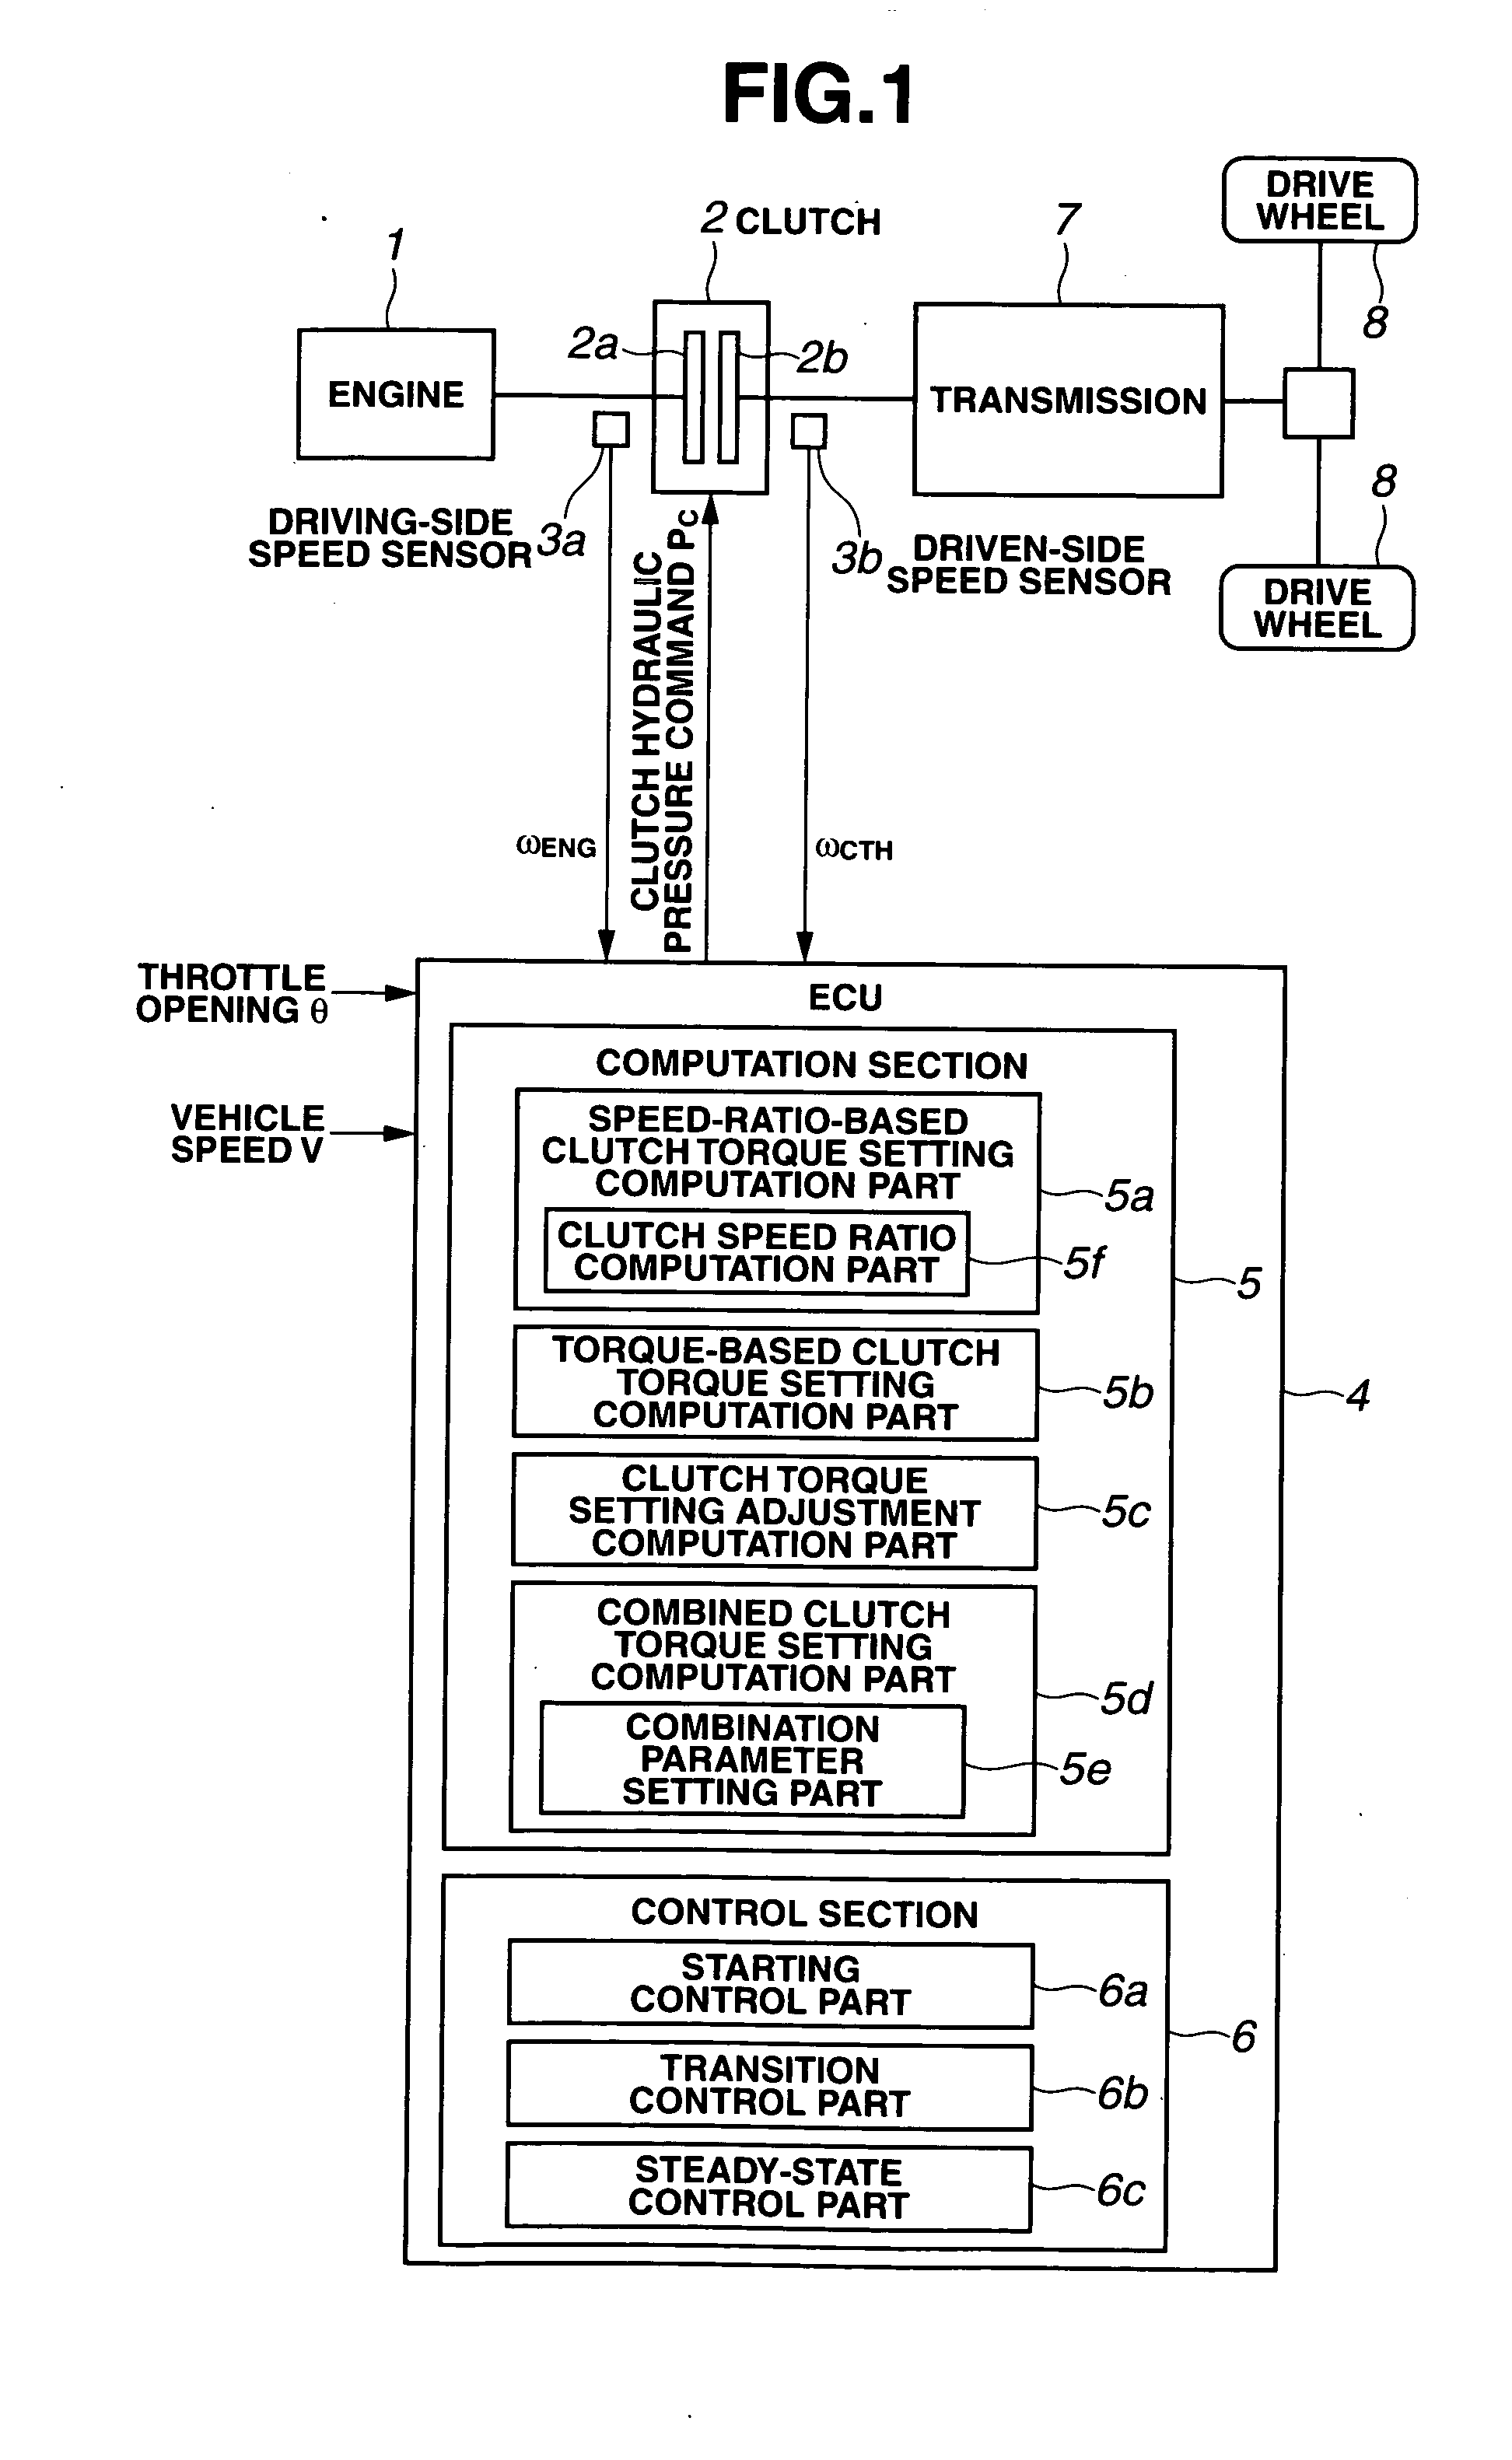 Clutch control apparatus and method